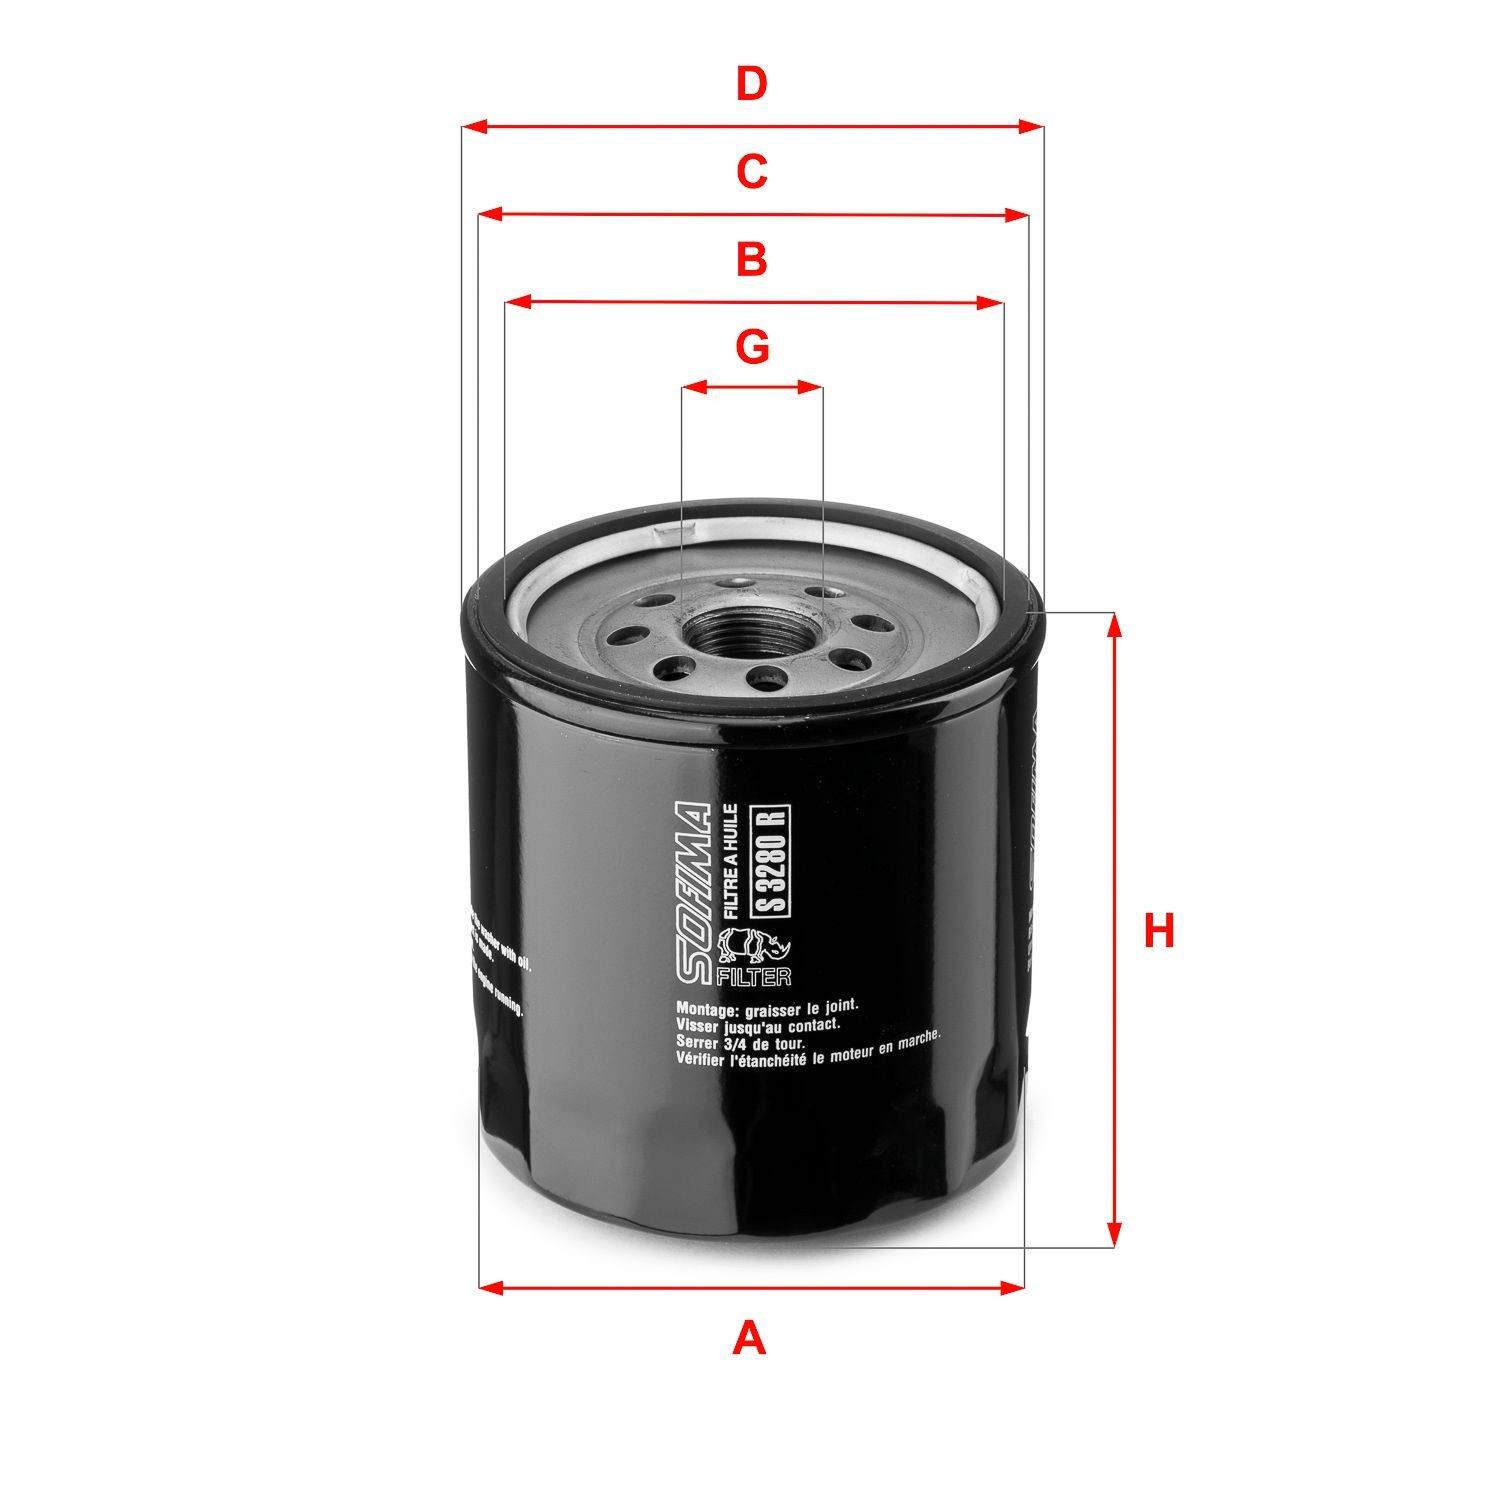 SOFIMA S 3280 R Oil filter M 22 X 1,5, with one anti-return valve, Spin-on Filter